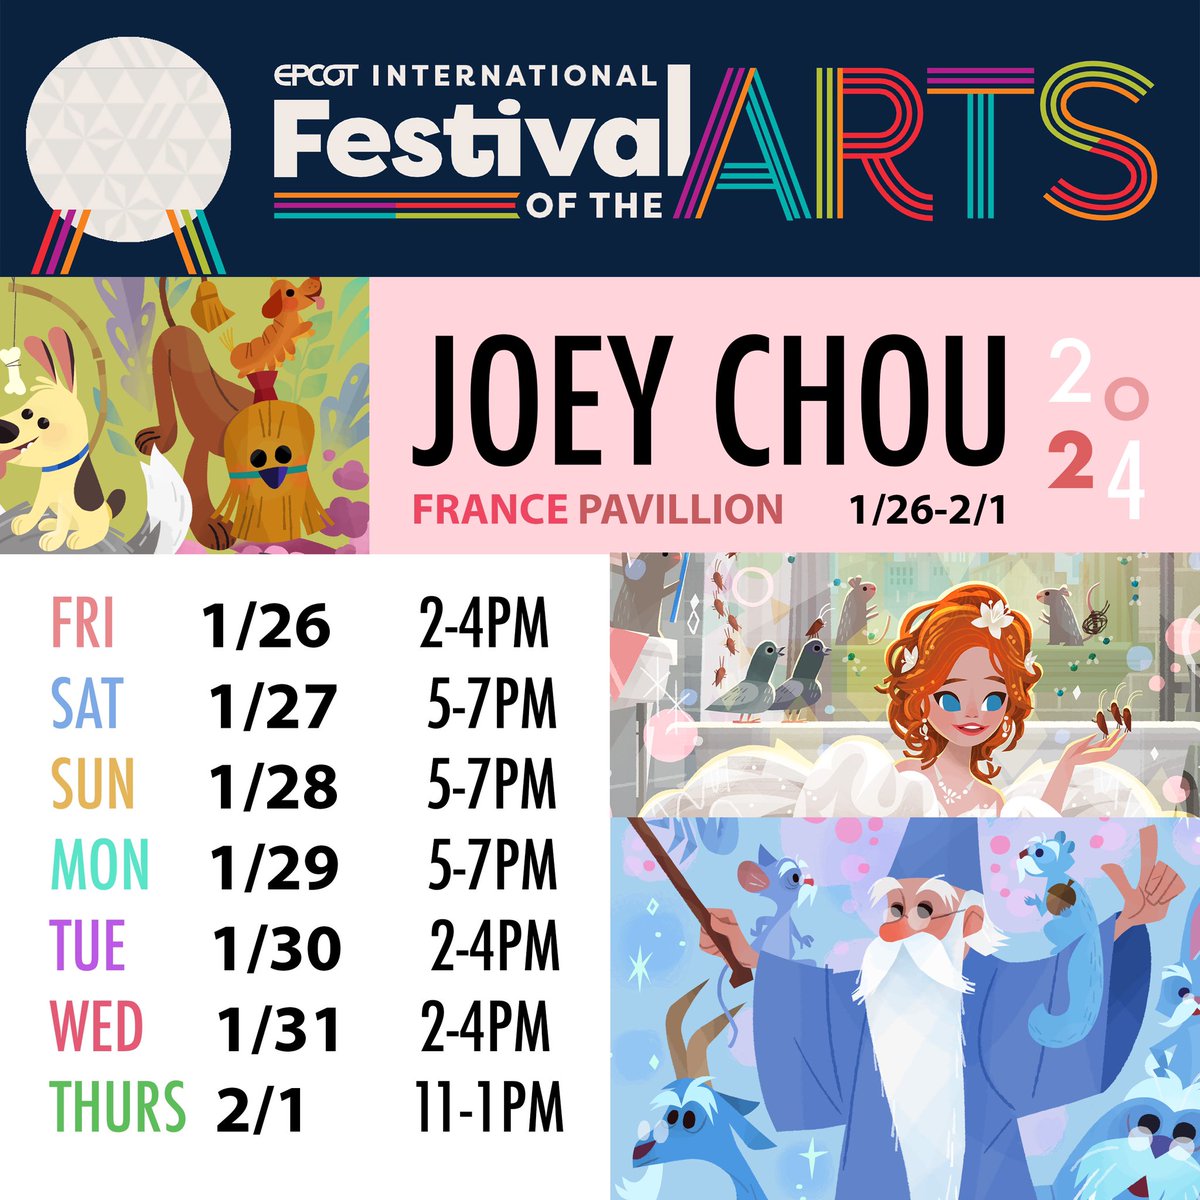 Excited to be back at #EPCOT International Festival of The Arts in 2024! hope to see you guys there! I will be signing at the France Pavillion at the world showcase. Fri 1/26 2-4pm Sat 1/27 5-7pm Sun 1/28 5-7pm Mon 1/29 5-7pm Tues 1/30 2-4pm Wed 1/31 2-4pm Thurs 2/1 11-1pm